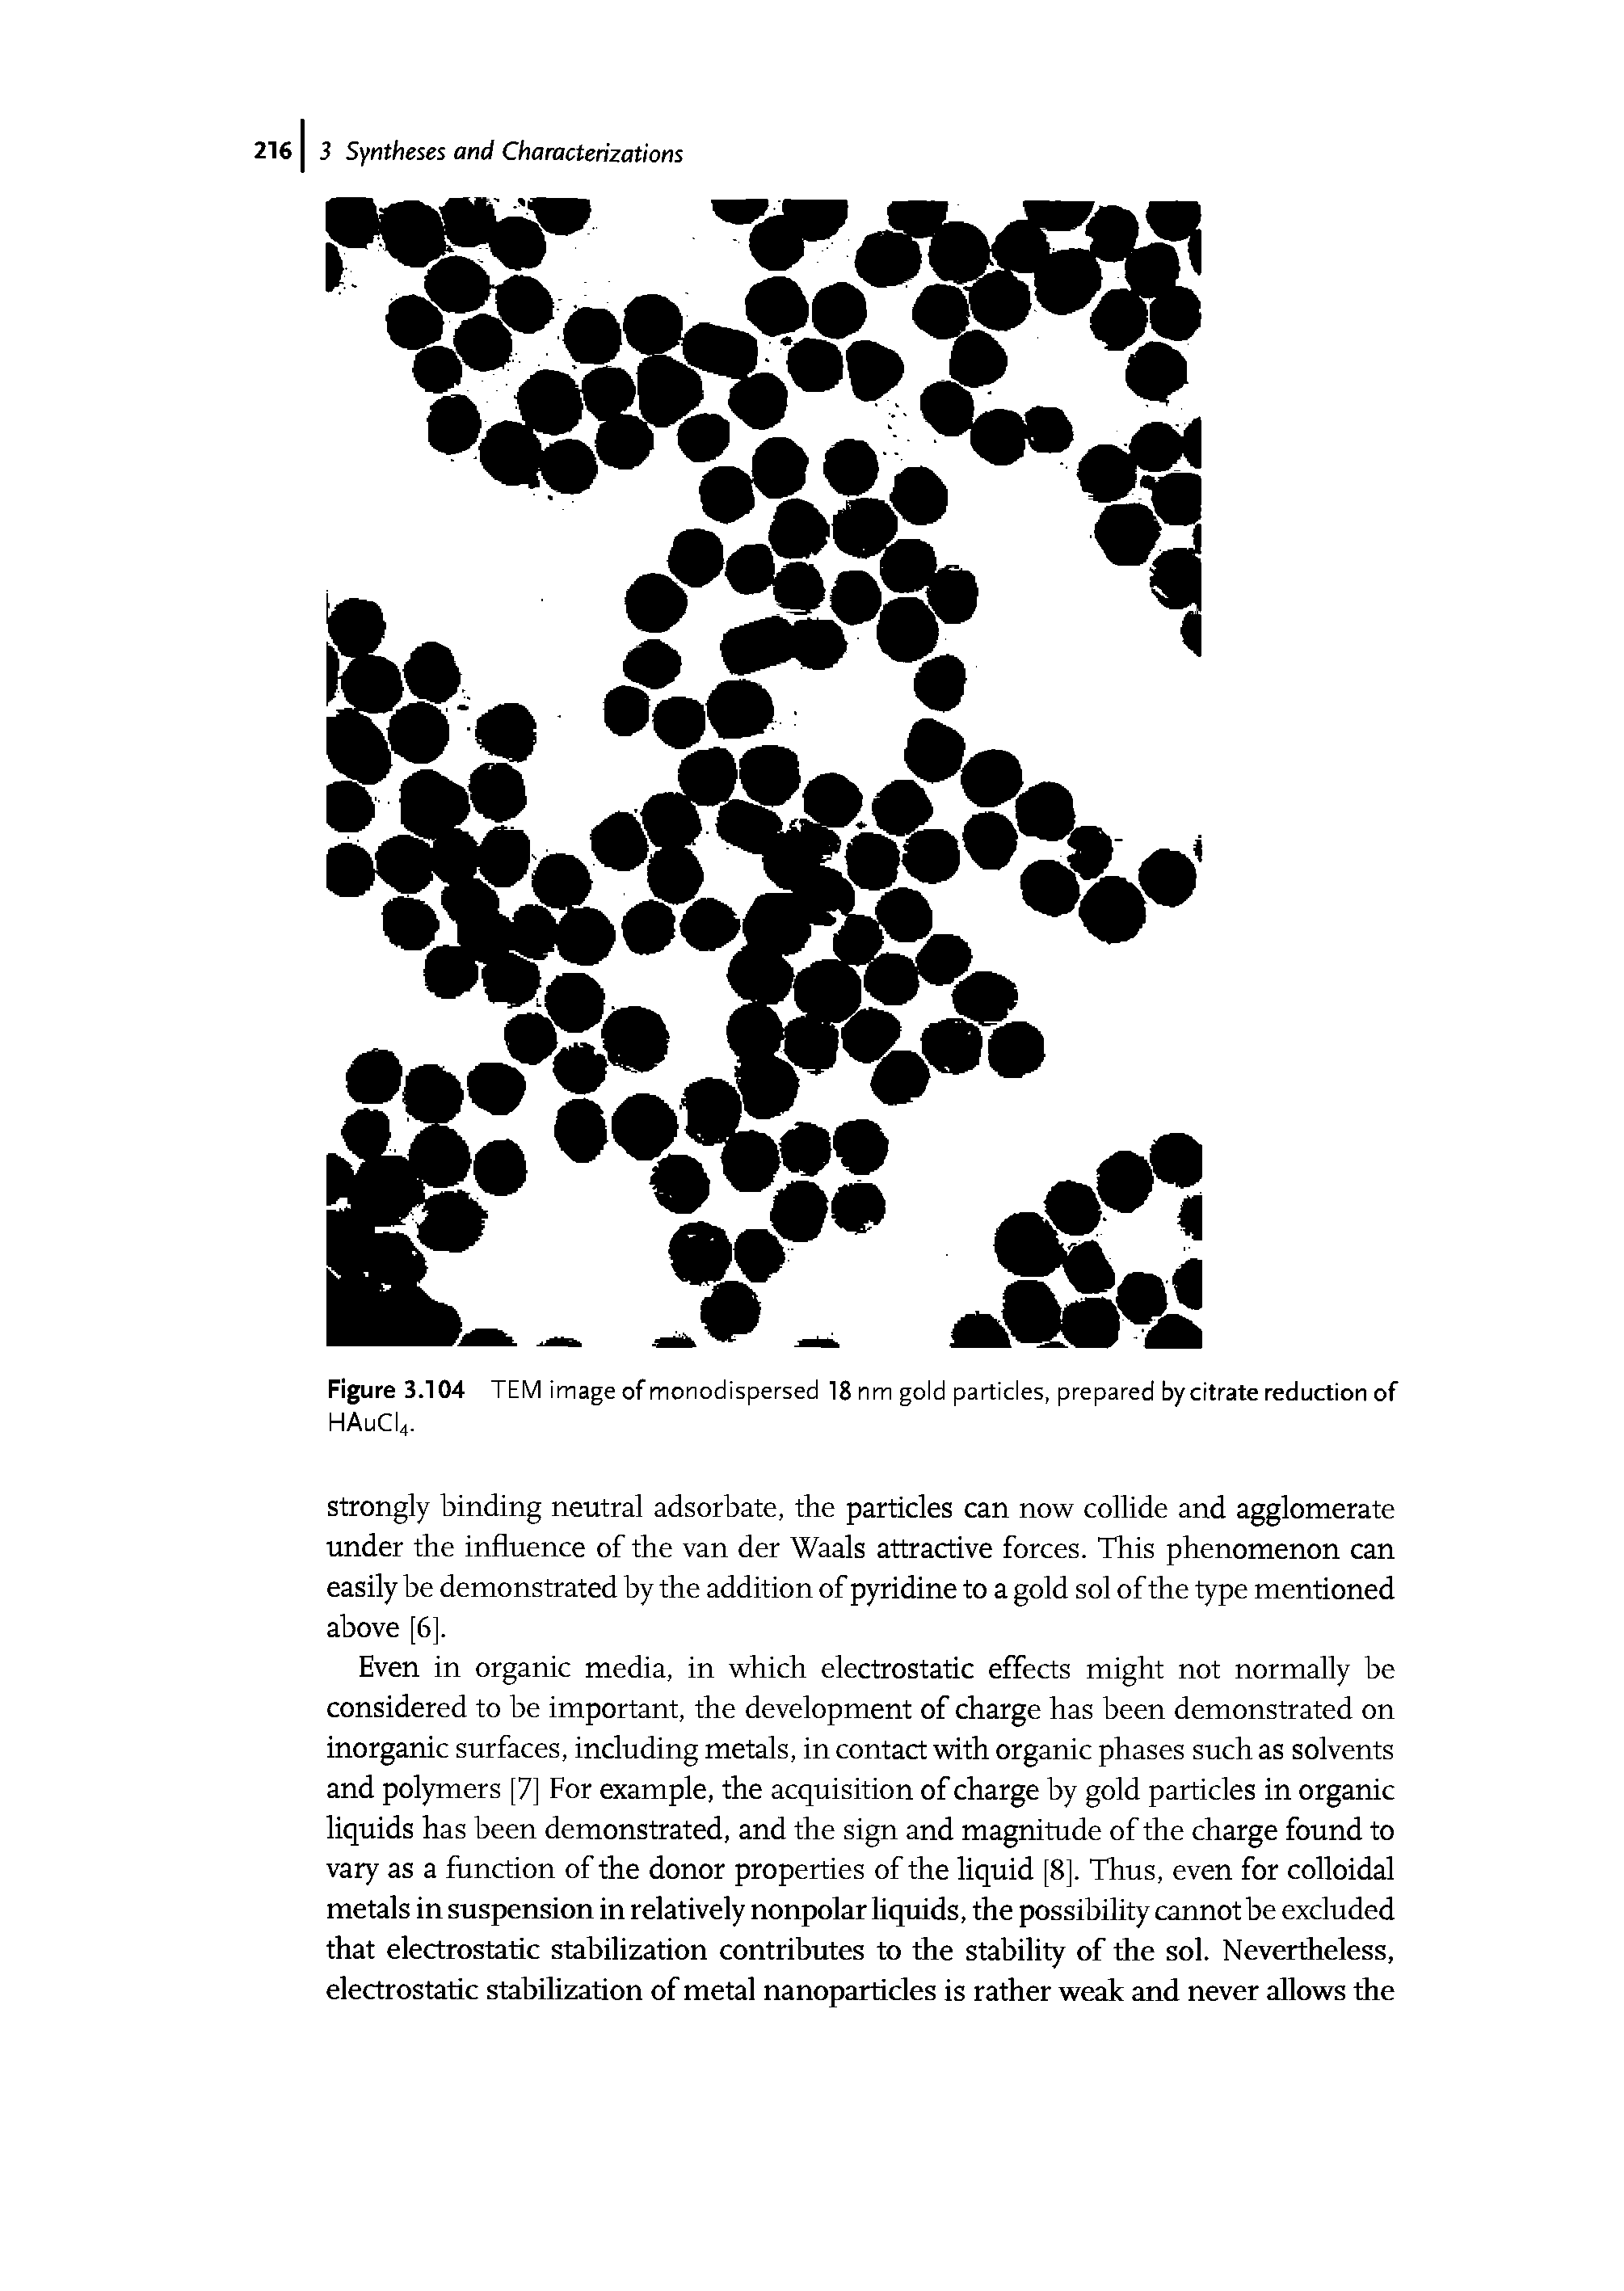 Figure 3.104 TEM image of monodispersed 18 nm gold particles, prepared by citrate reduction of HAuCU.